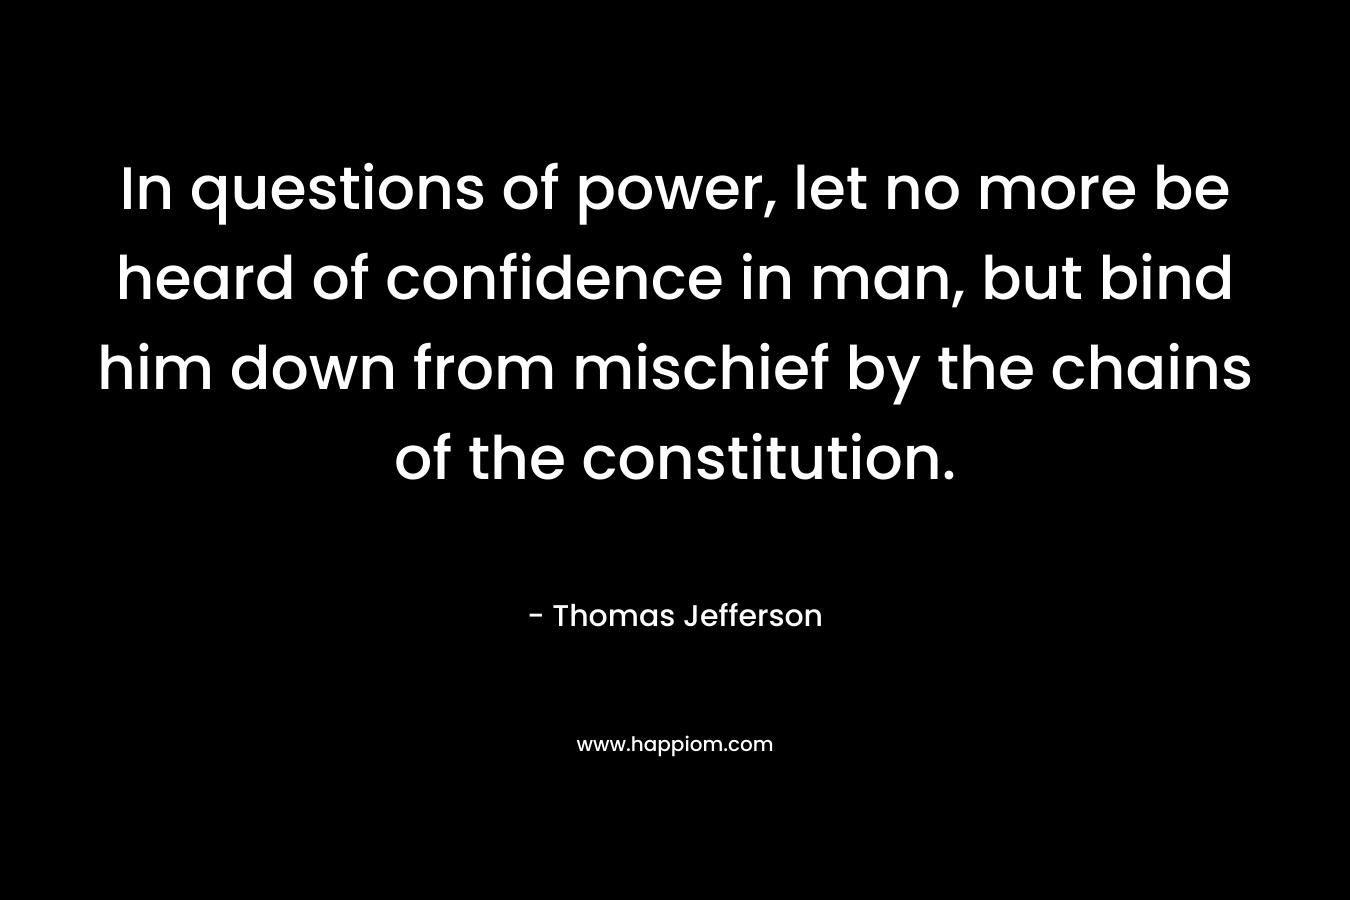 In questions of power, let no more be heard of confidence in man, but bind him down from mischief by the chains of the constitution. – Thomas Jefferson